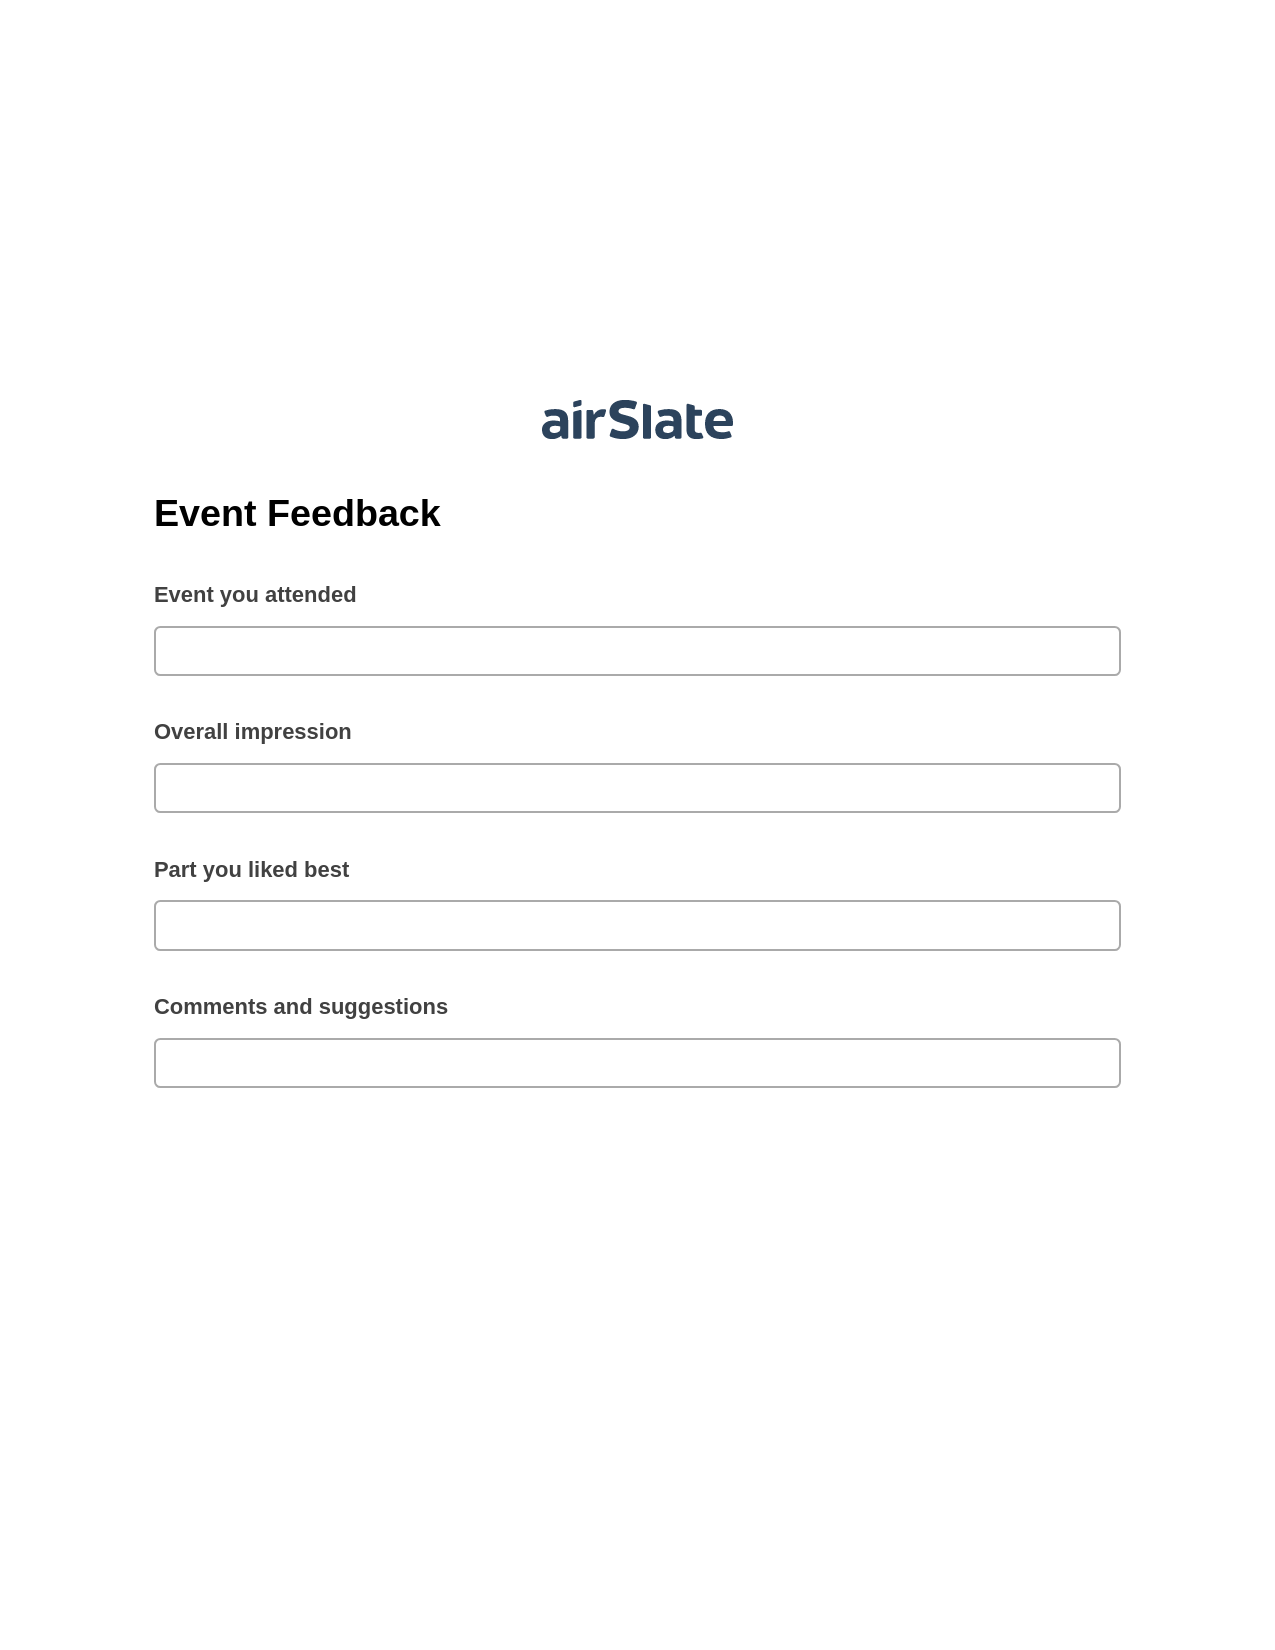 Event Feedback Pre-fill from CSV File Bot, Document Hide Bot, Archive to SharePoint Folder Bot